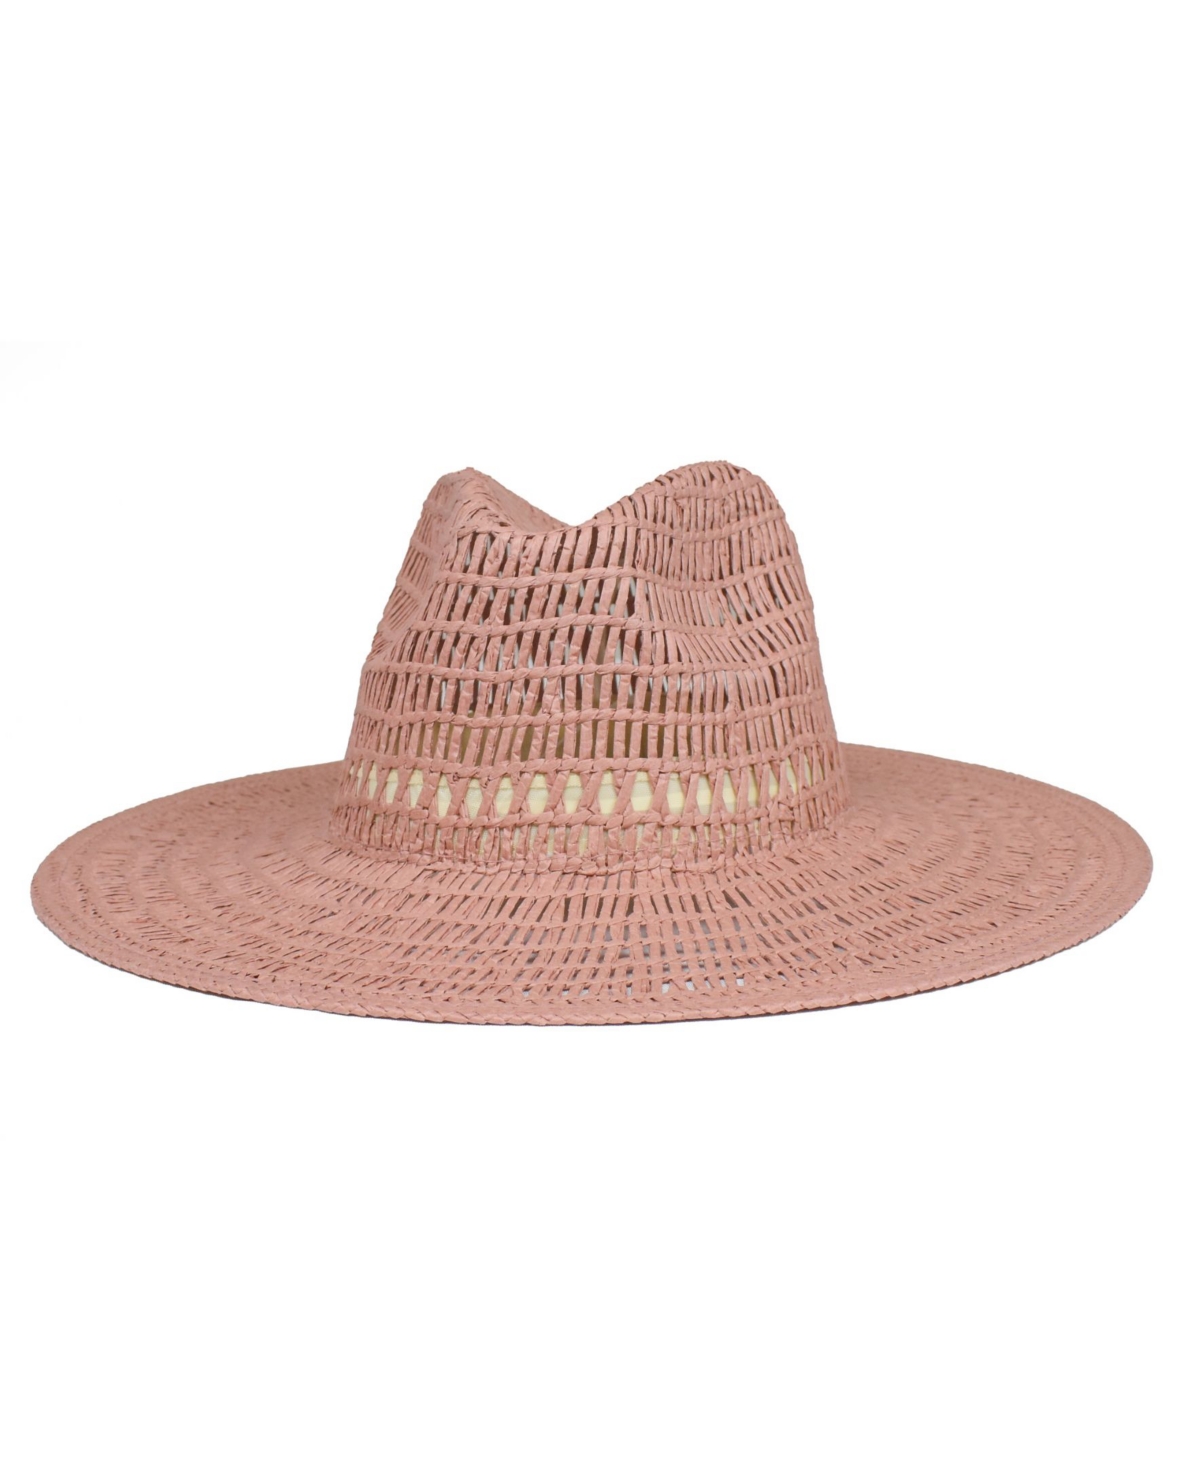 Marcus Adler Women's Straw Hat With Cut Out Detail In Blush